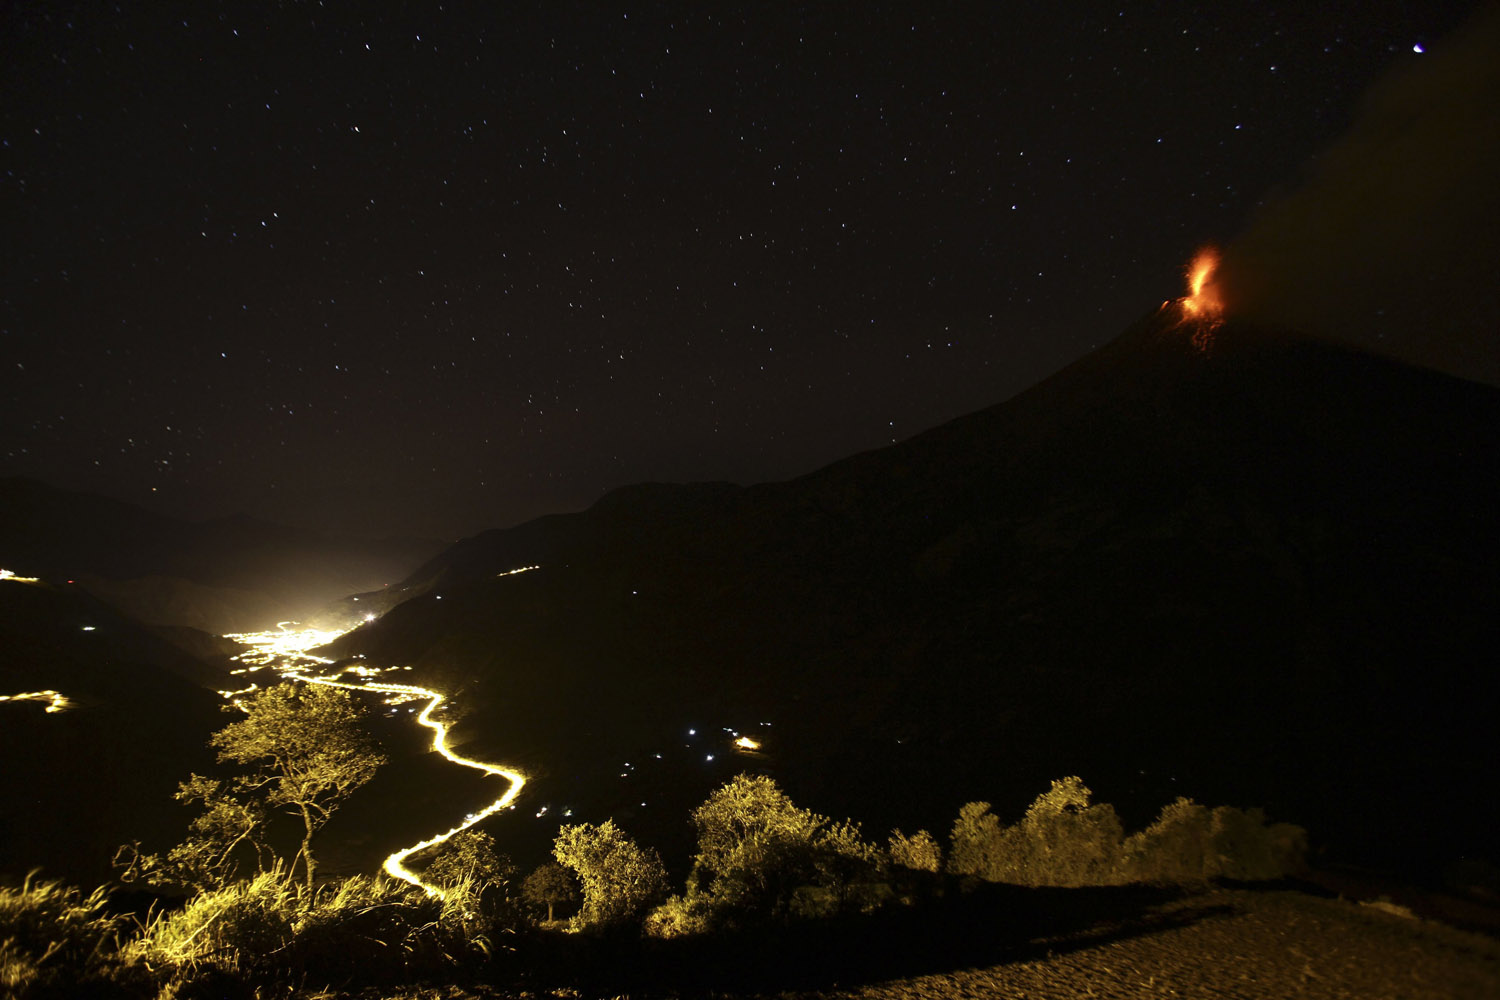 Aug. 21, 2012. Ecuador's Tungurahua volcano spews ash on the nearby town of Banos. The authorities are encouraging residents living near the volcano to evacuate.